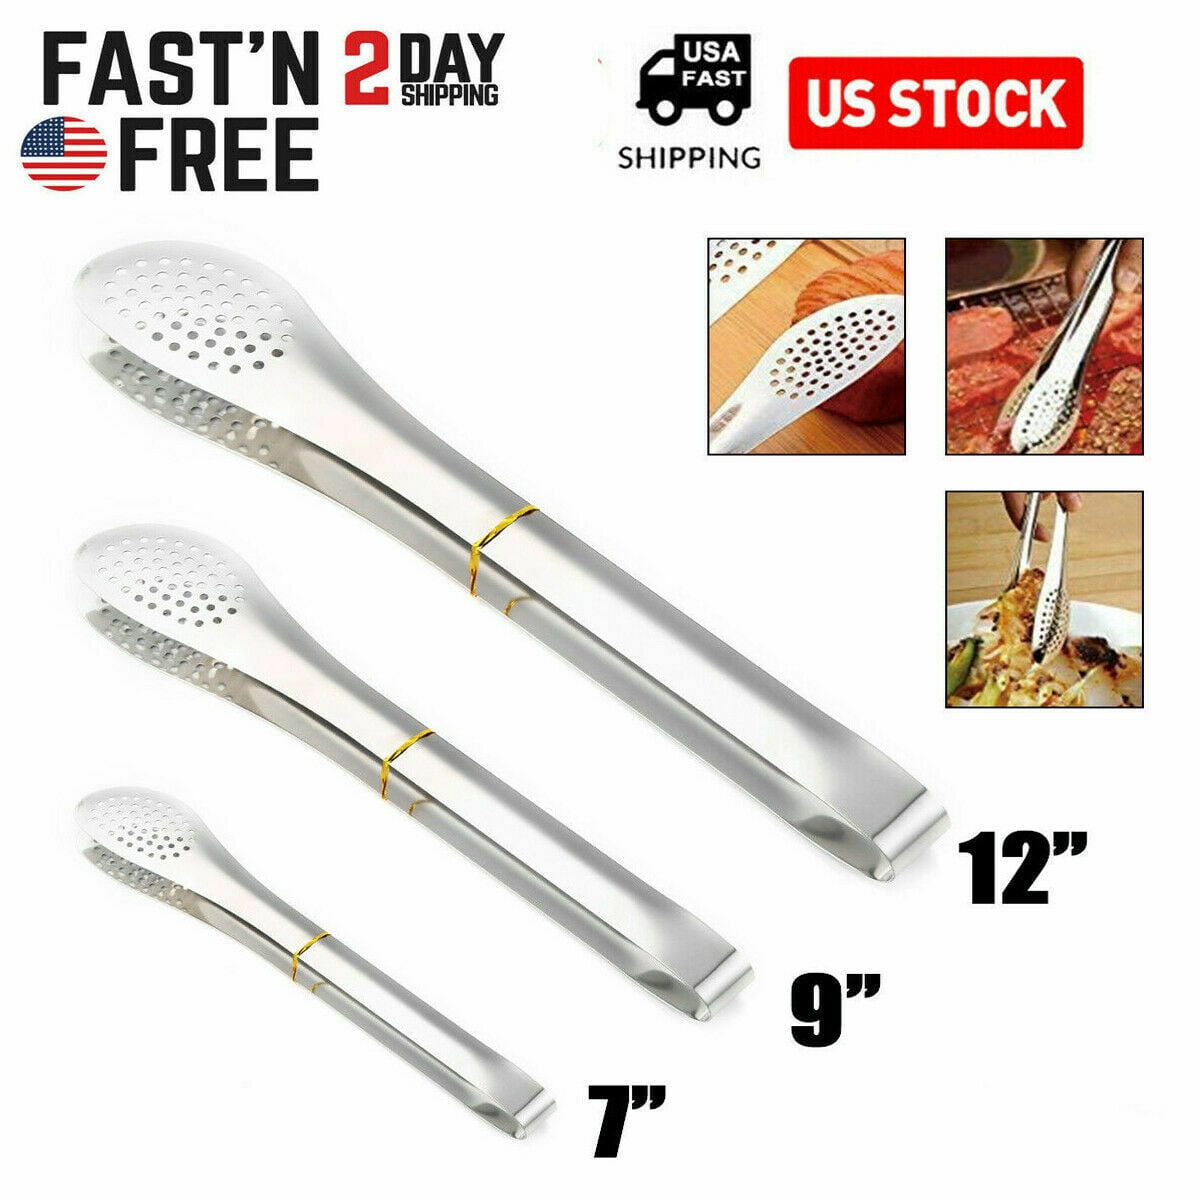 Details about   Multi Purpose Metal Tongs Kitchen Grill BBQ Cooking Serving Y4D9 